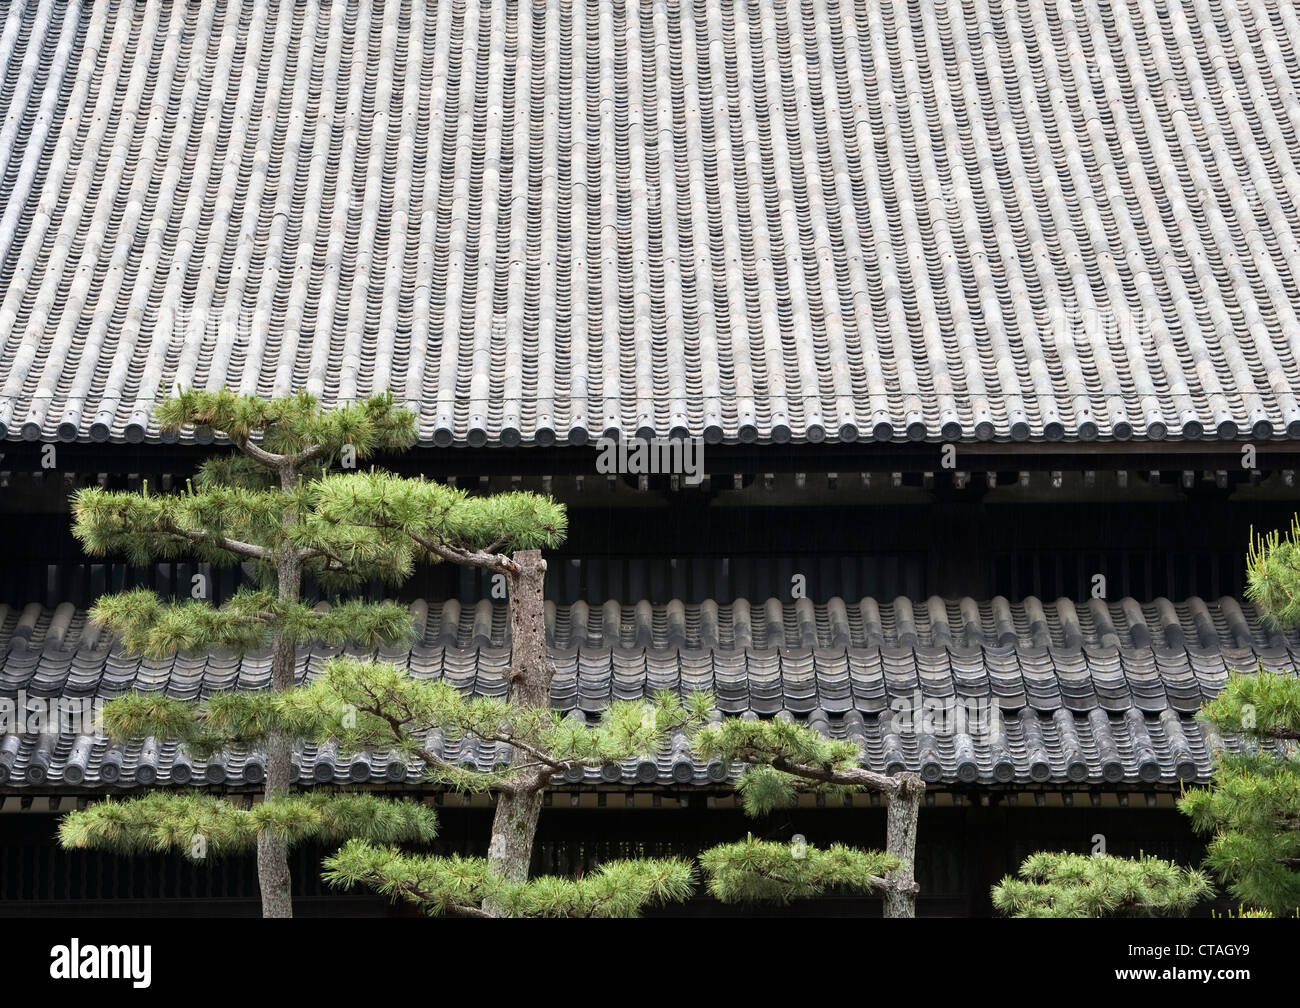 Carefully pruned Japanese black pine trees (Pinus thunbergii) in front of the tiled roof of a Buddhist temple at Tofuku-ji, Kyoto, Japan Stock Photo